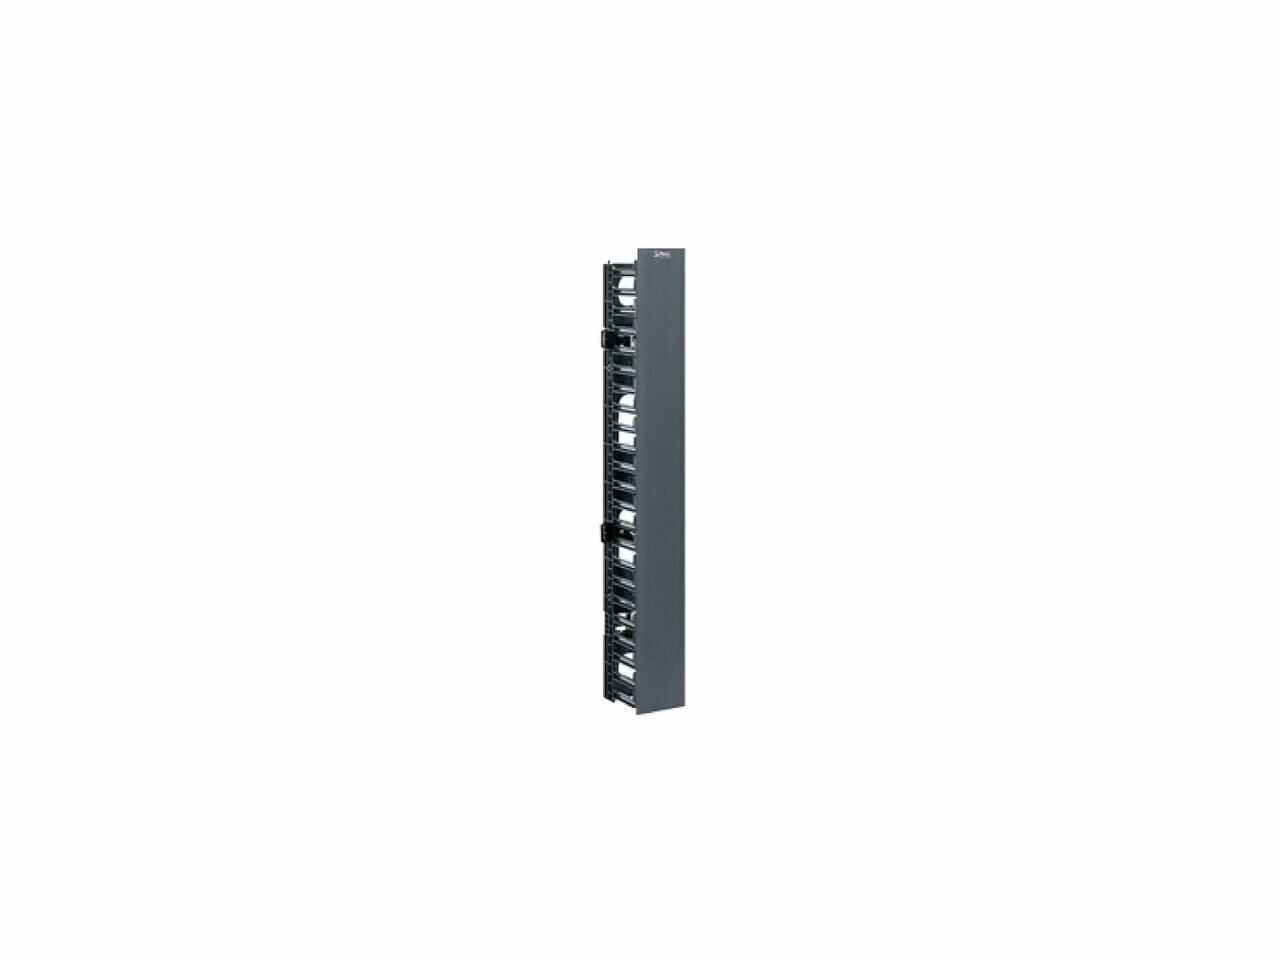 Panduit Netrunner Verticle Cable Manager - WMPVF45E